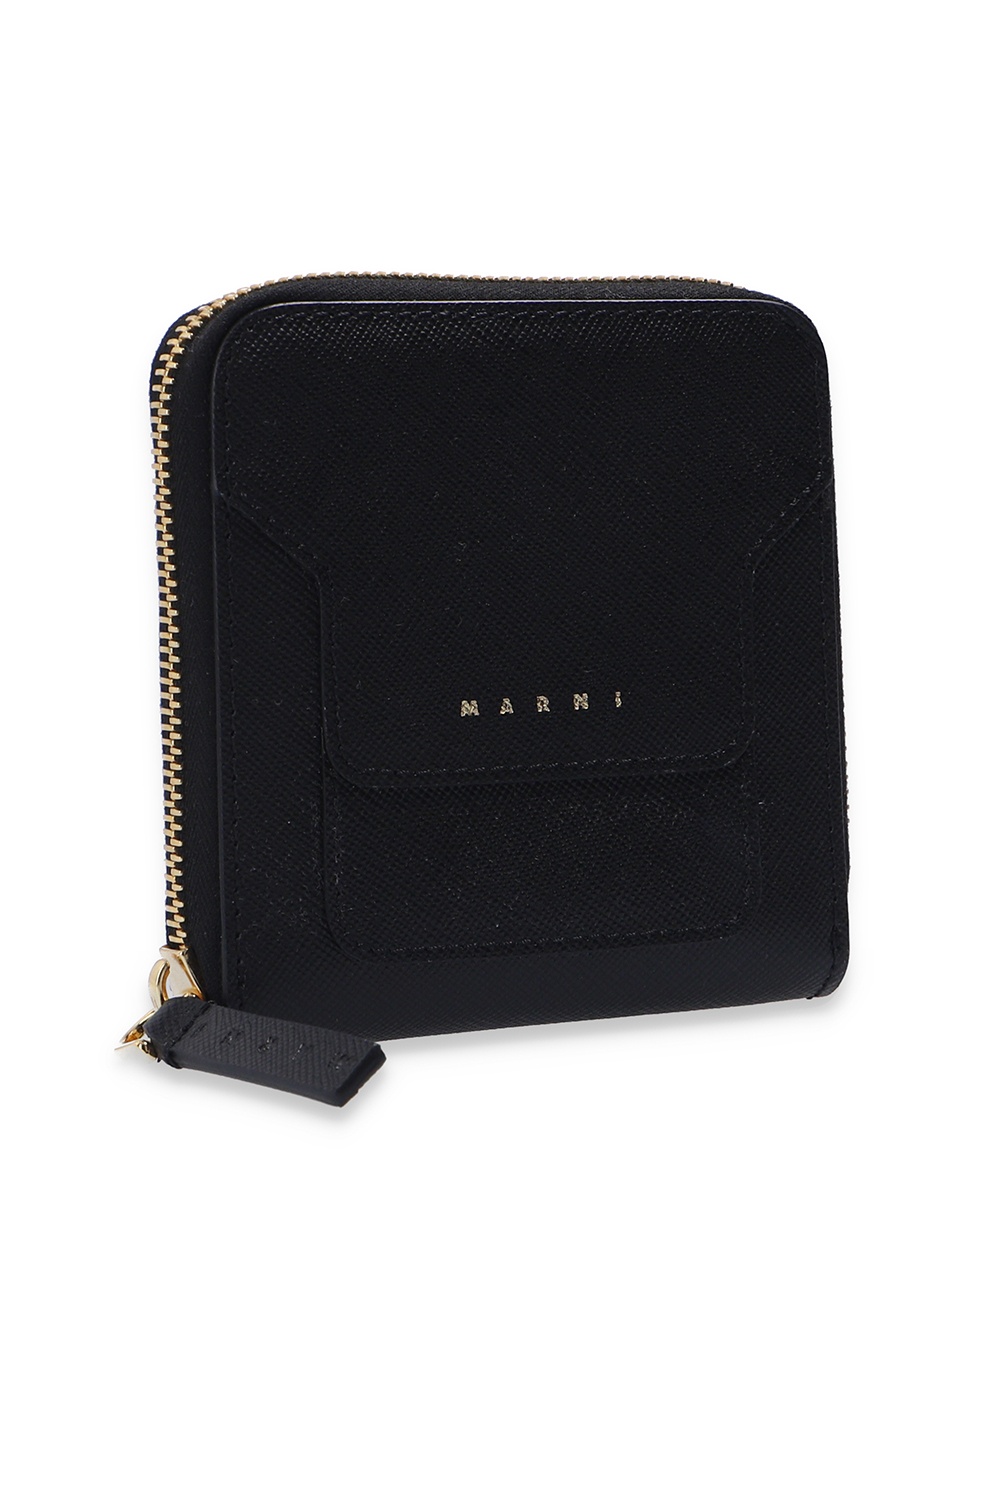 Marni Leather wallet with logo | Women's Accessories | Vitkac